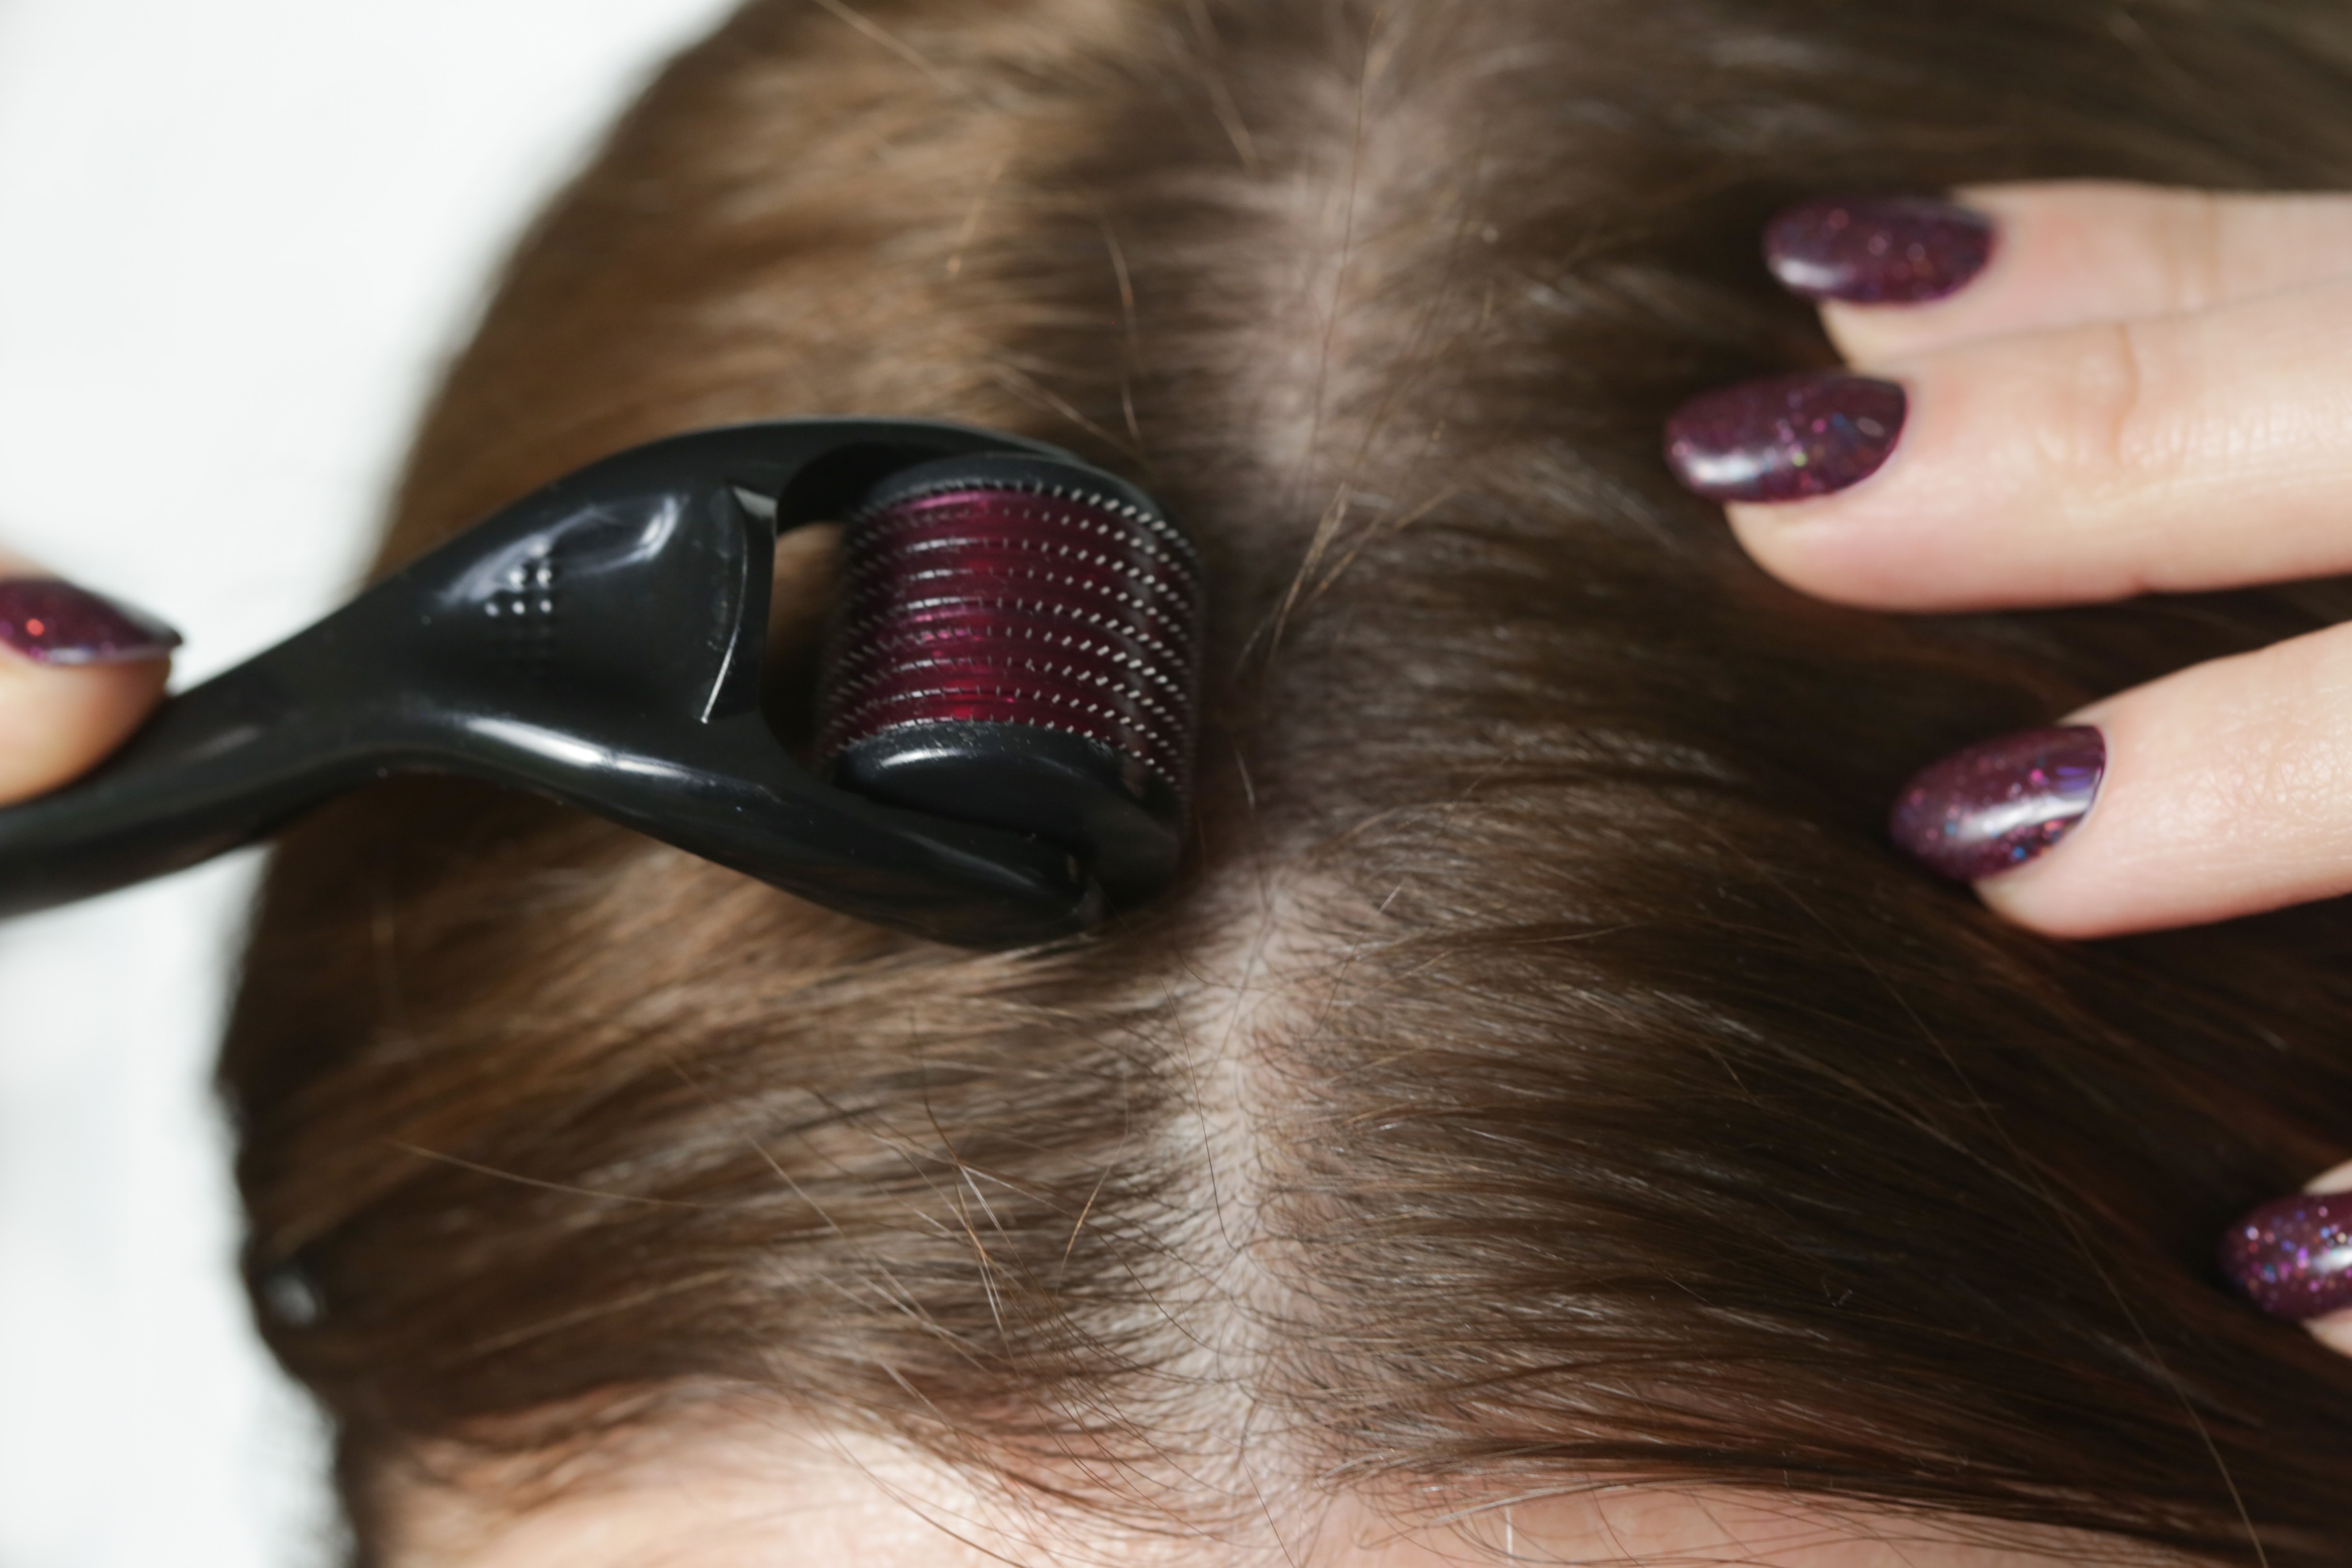 A woman uses a microneedle derma roller to stimulate new hair growth. Photo: Shutterstock